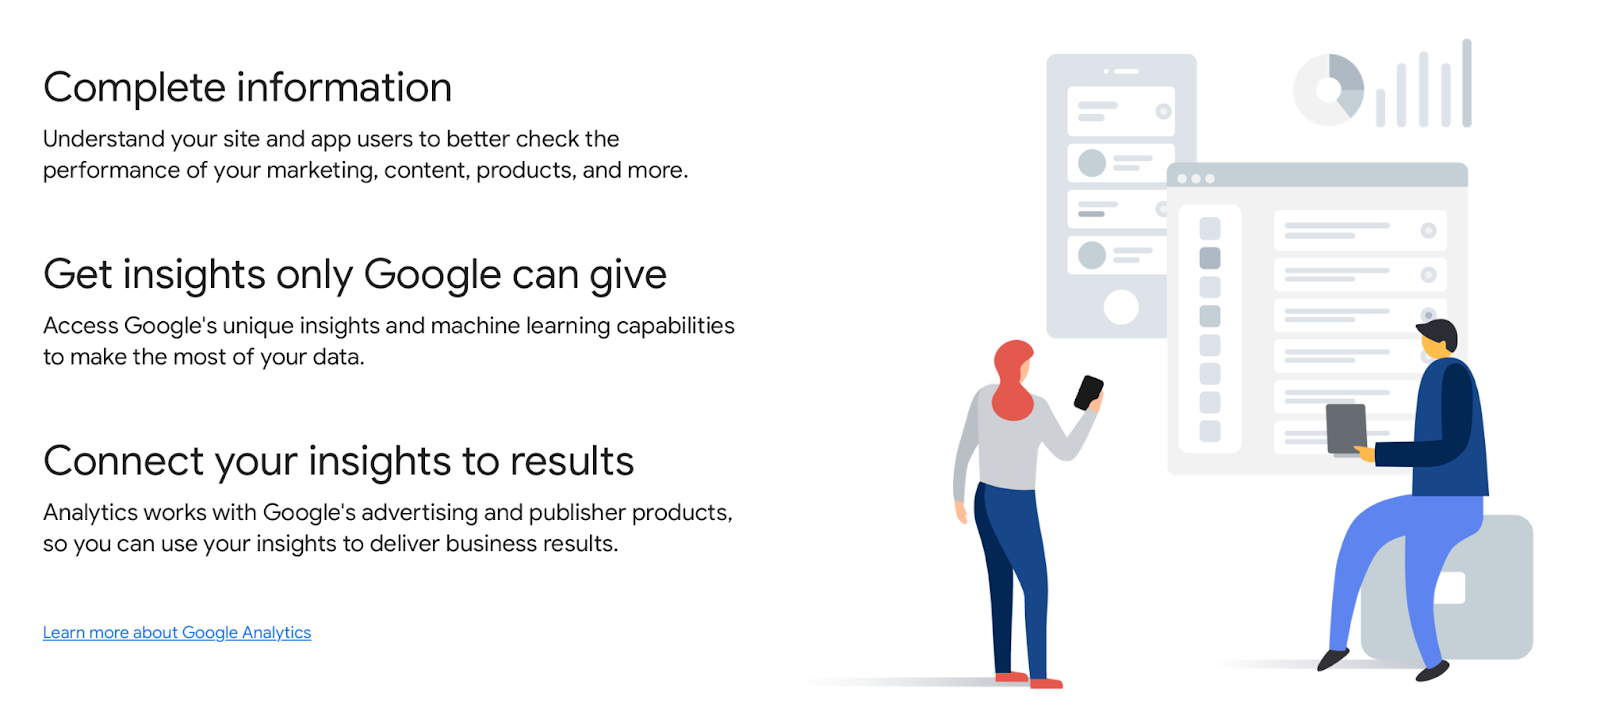 There is an illustration on the right of a man and a woman looking at data projected above them on devices. On the left, Google Analytics promises "Complete information", "Get insights only Google can give", and "Connect your insights to results". 